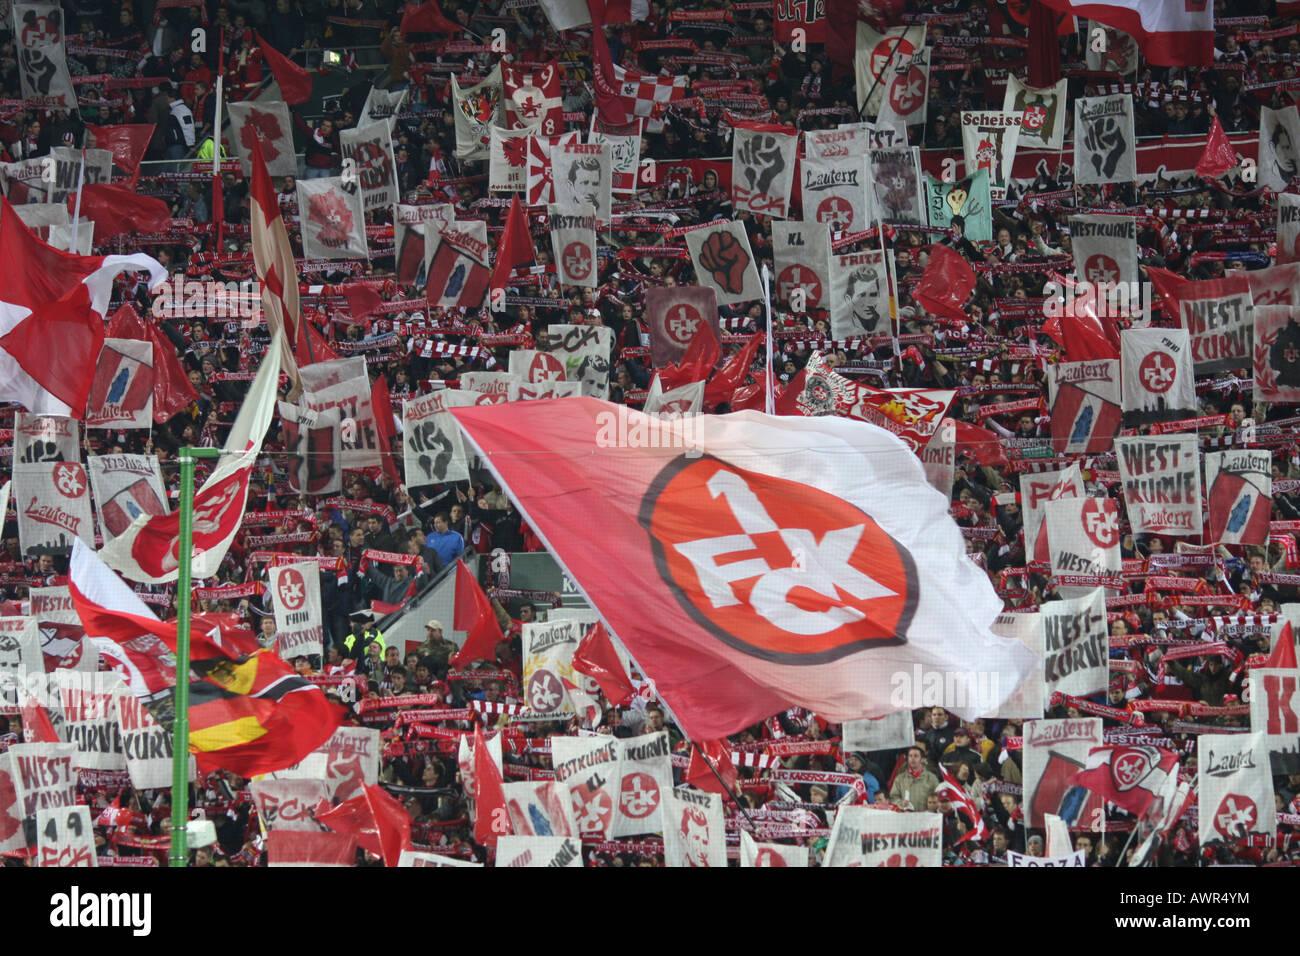 Fans shouting for the german soccer club 1. FC Kaiserslautern, Germany Stock Photo